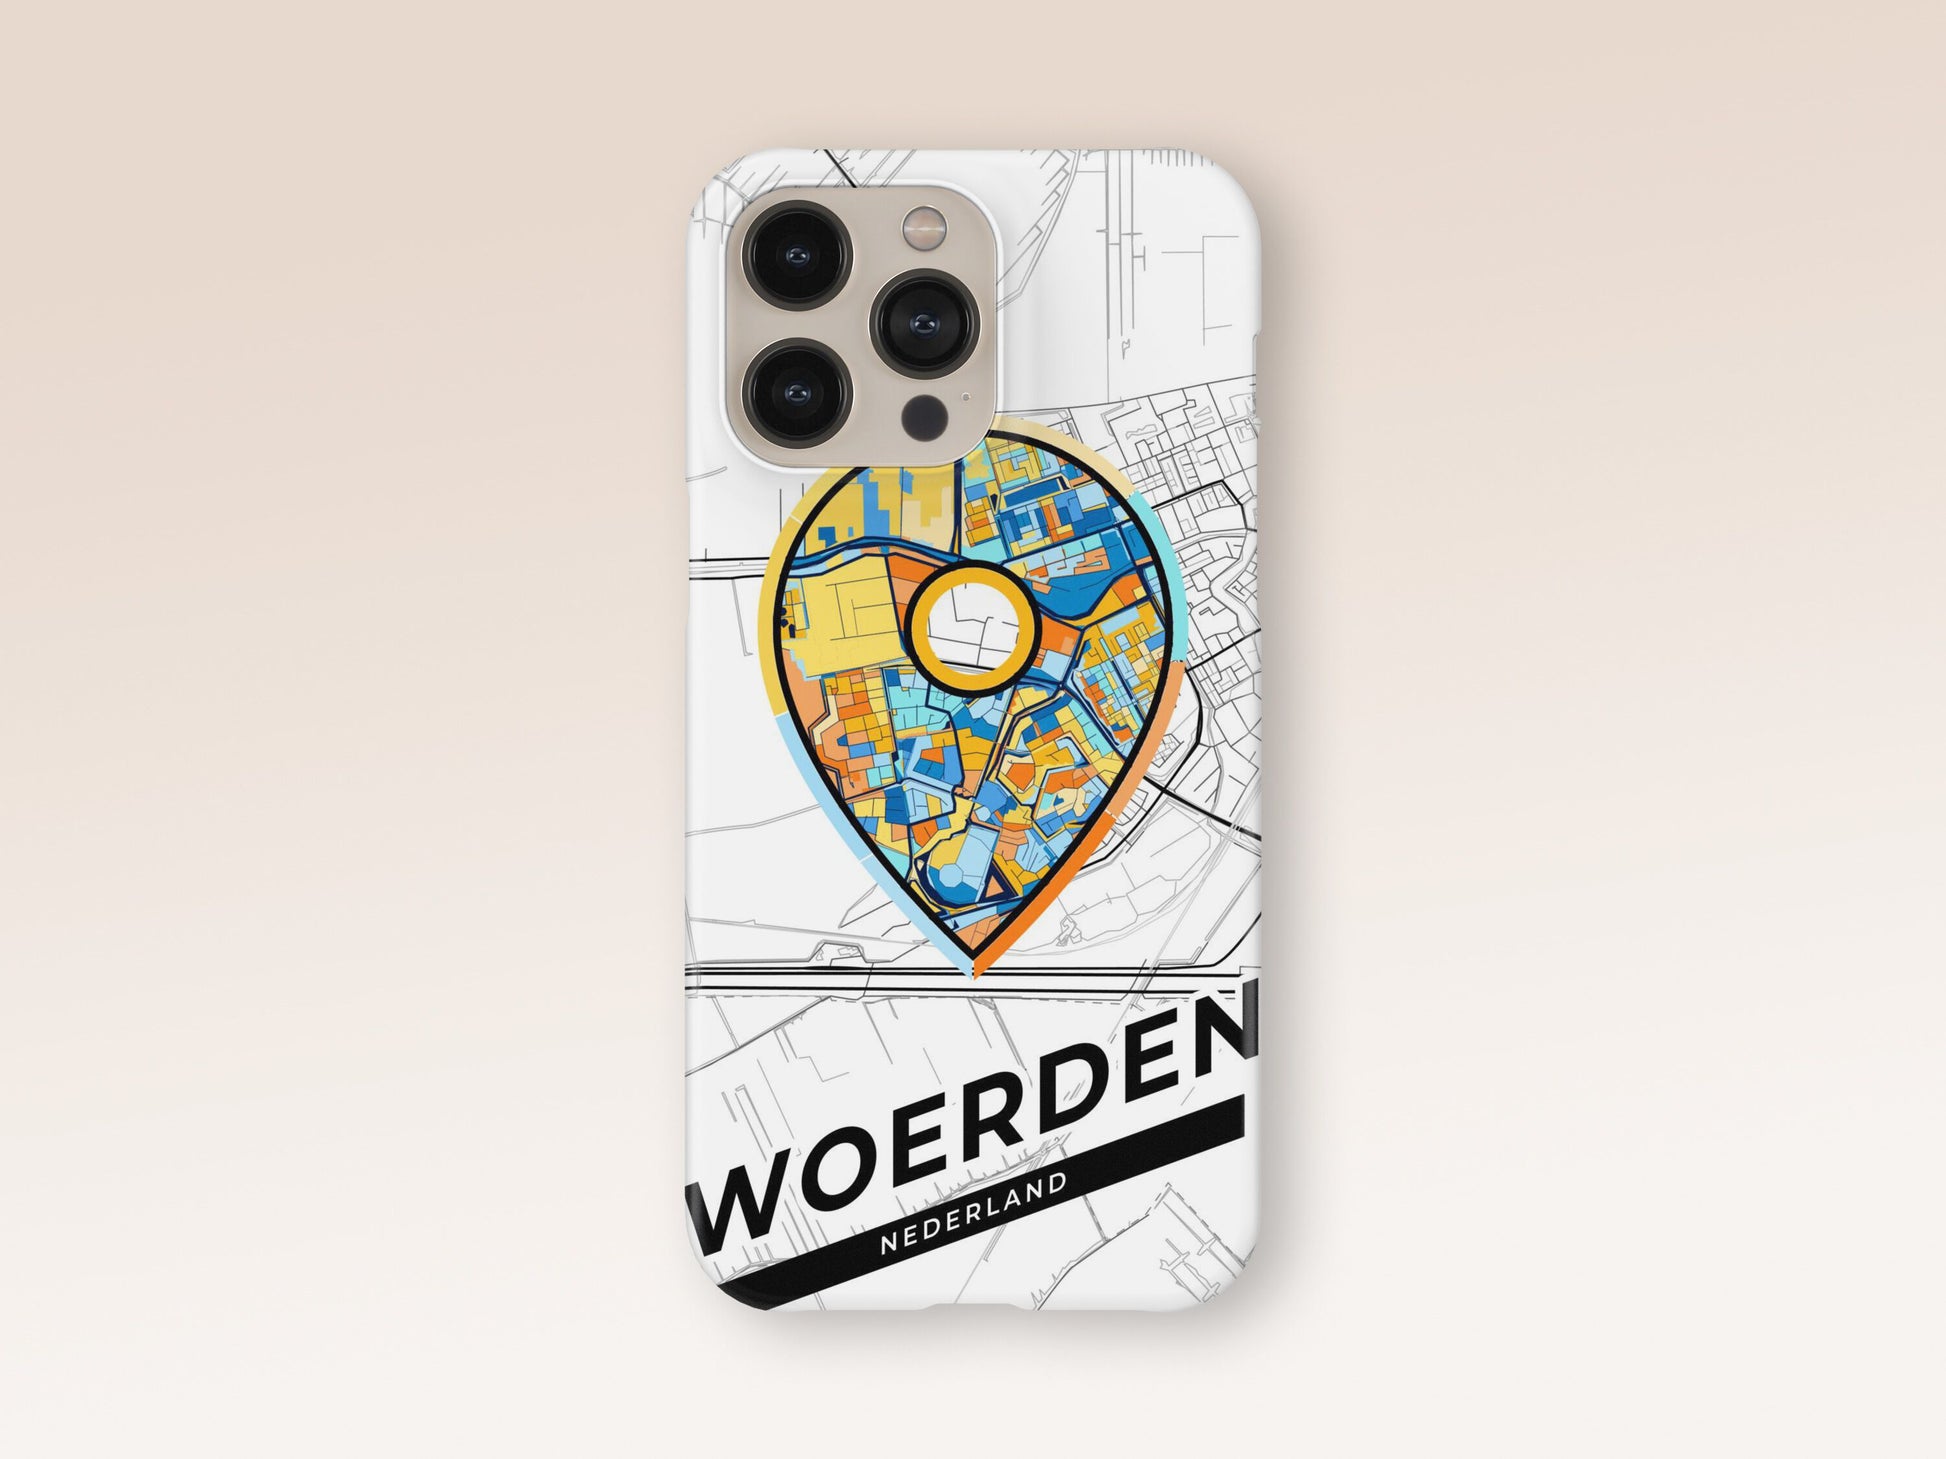 Woerden Netherlands slim phone case with colorful icon 1